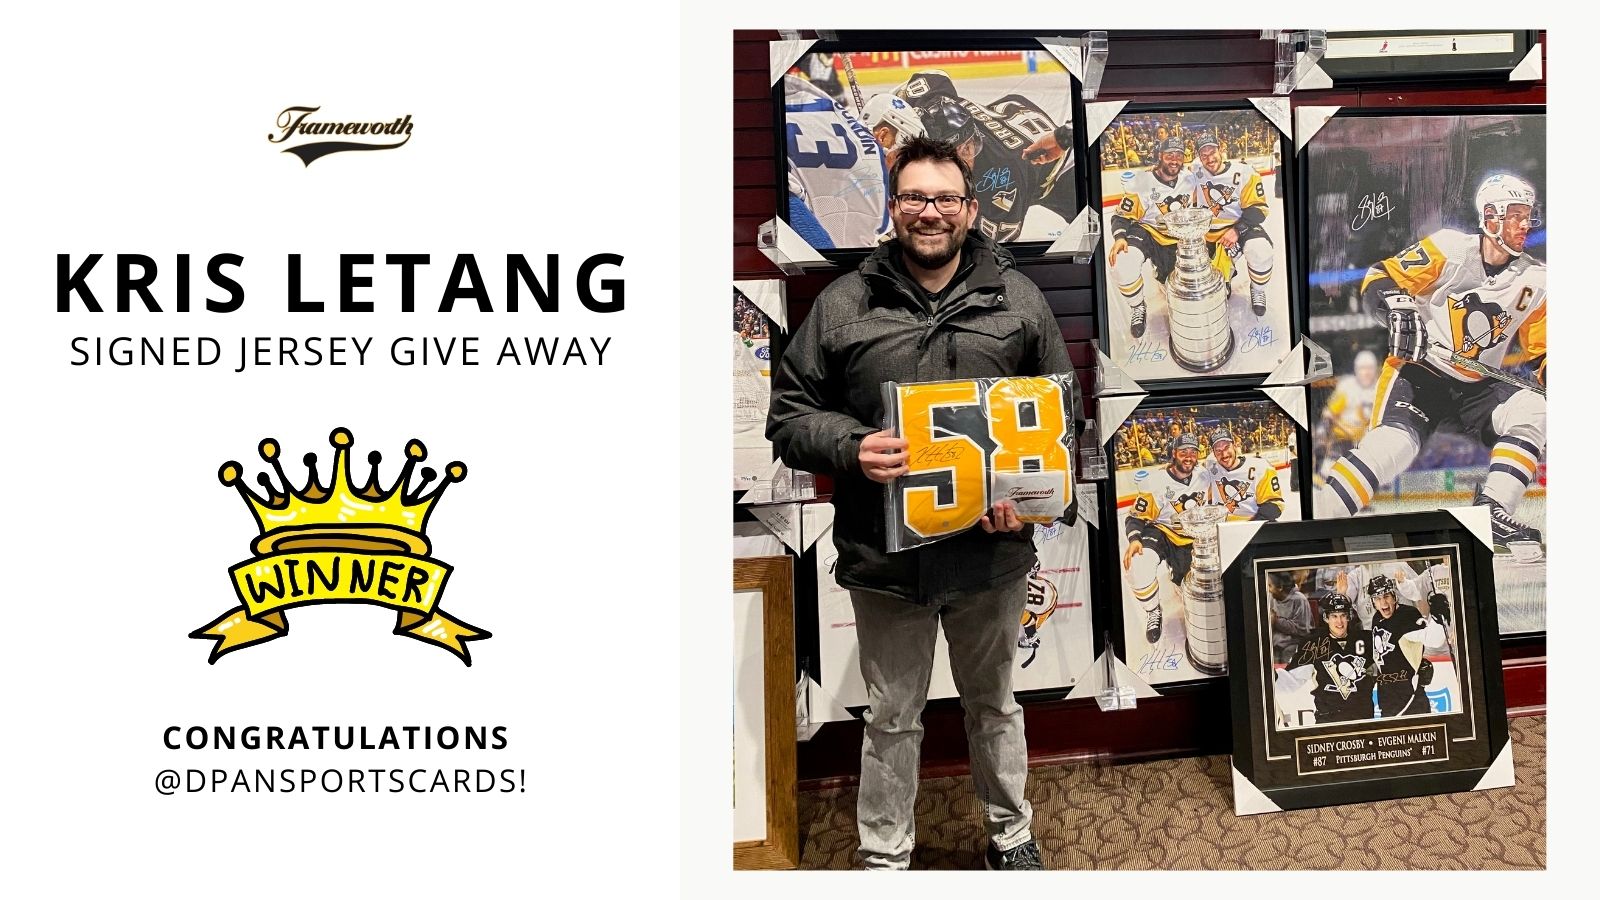 Kris Letang signed jersey give away. Frameworth Sports